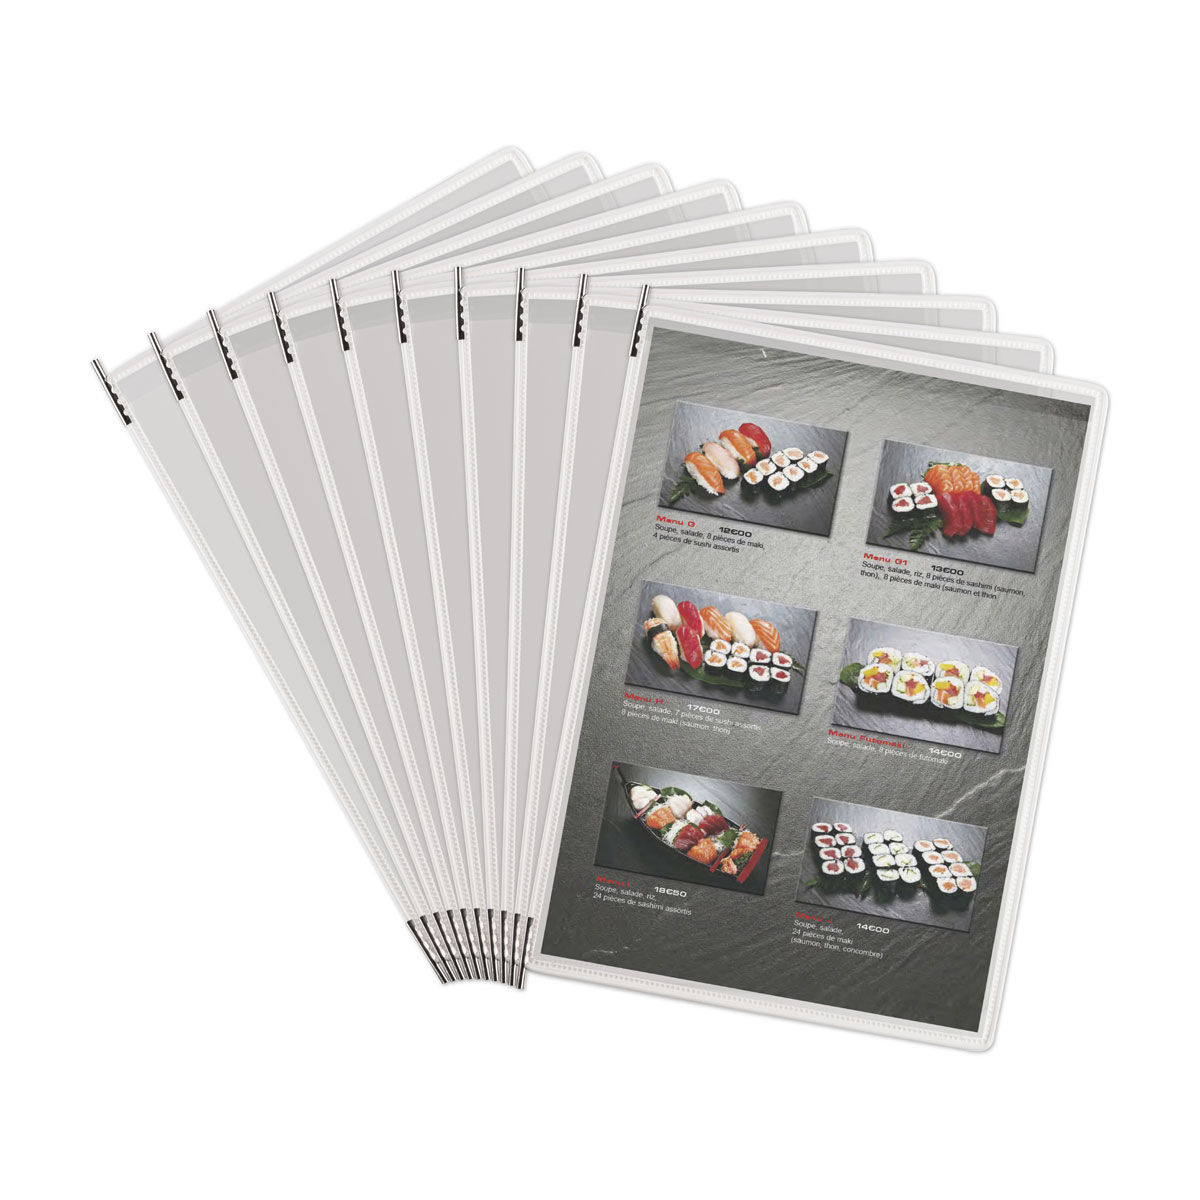 Pa020 Antimicrobial Display Pockets For Wall Or Desk Units